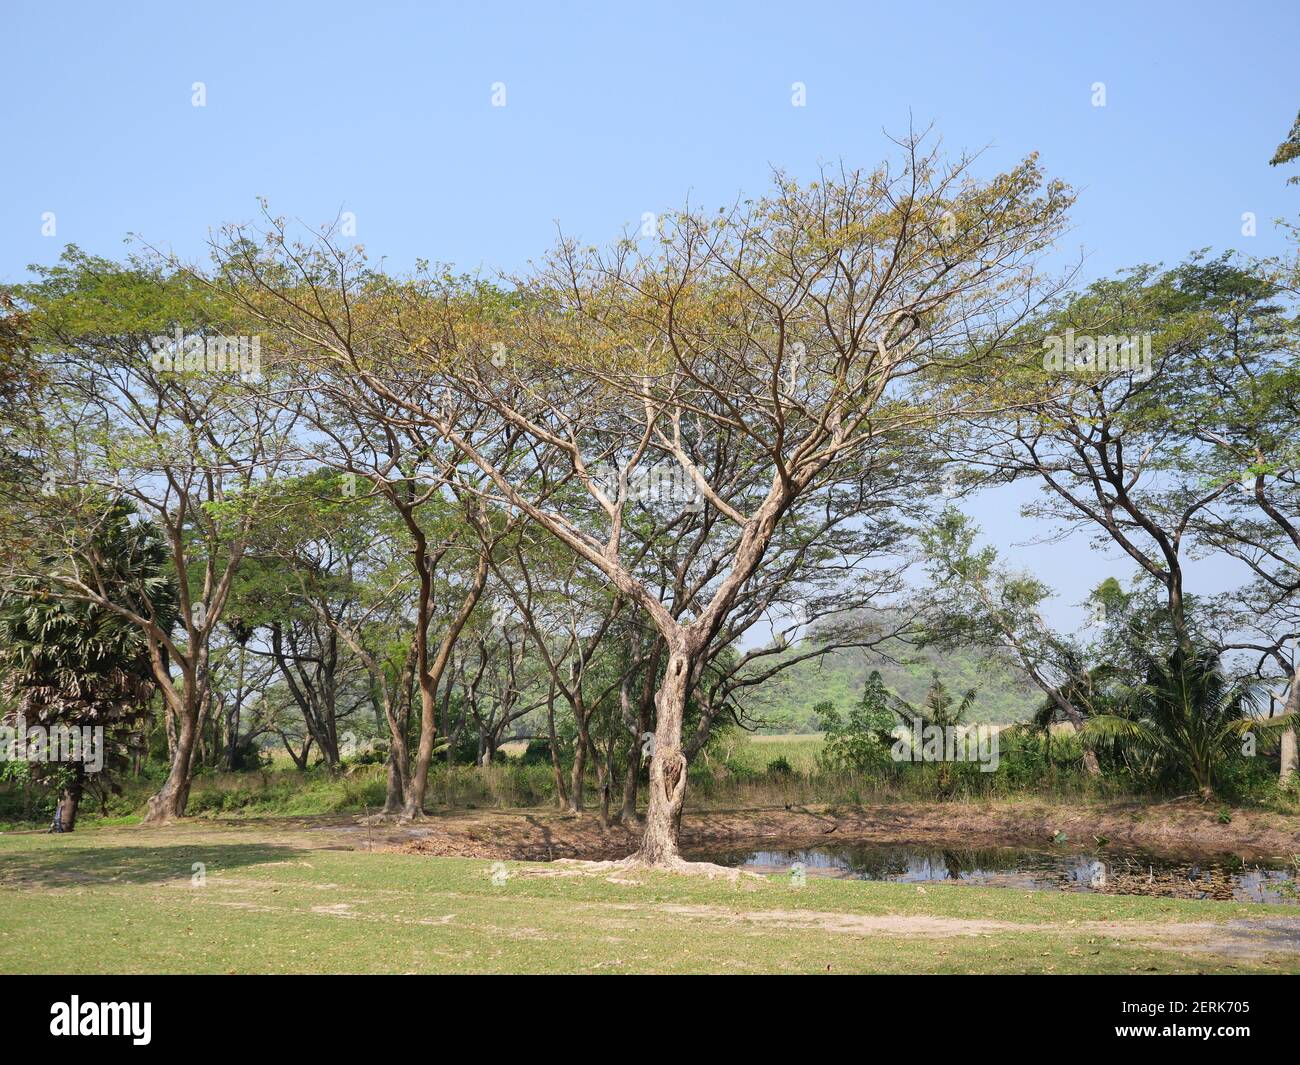 Brown Branch And Green Leaves Bush Of Mimosa Tree With Swamp In Forest At Summer With Blue Sky In Background Leaf That Turn Yellow In Thailand Stock Photo Alamy